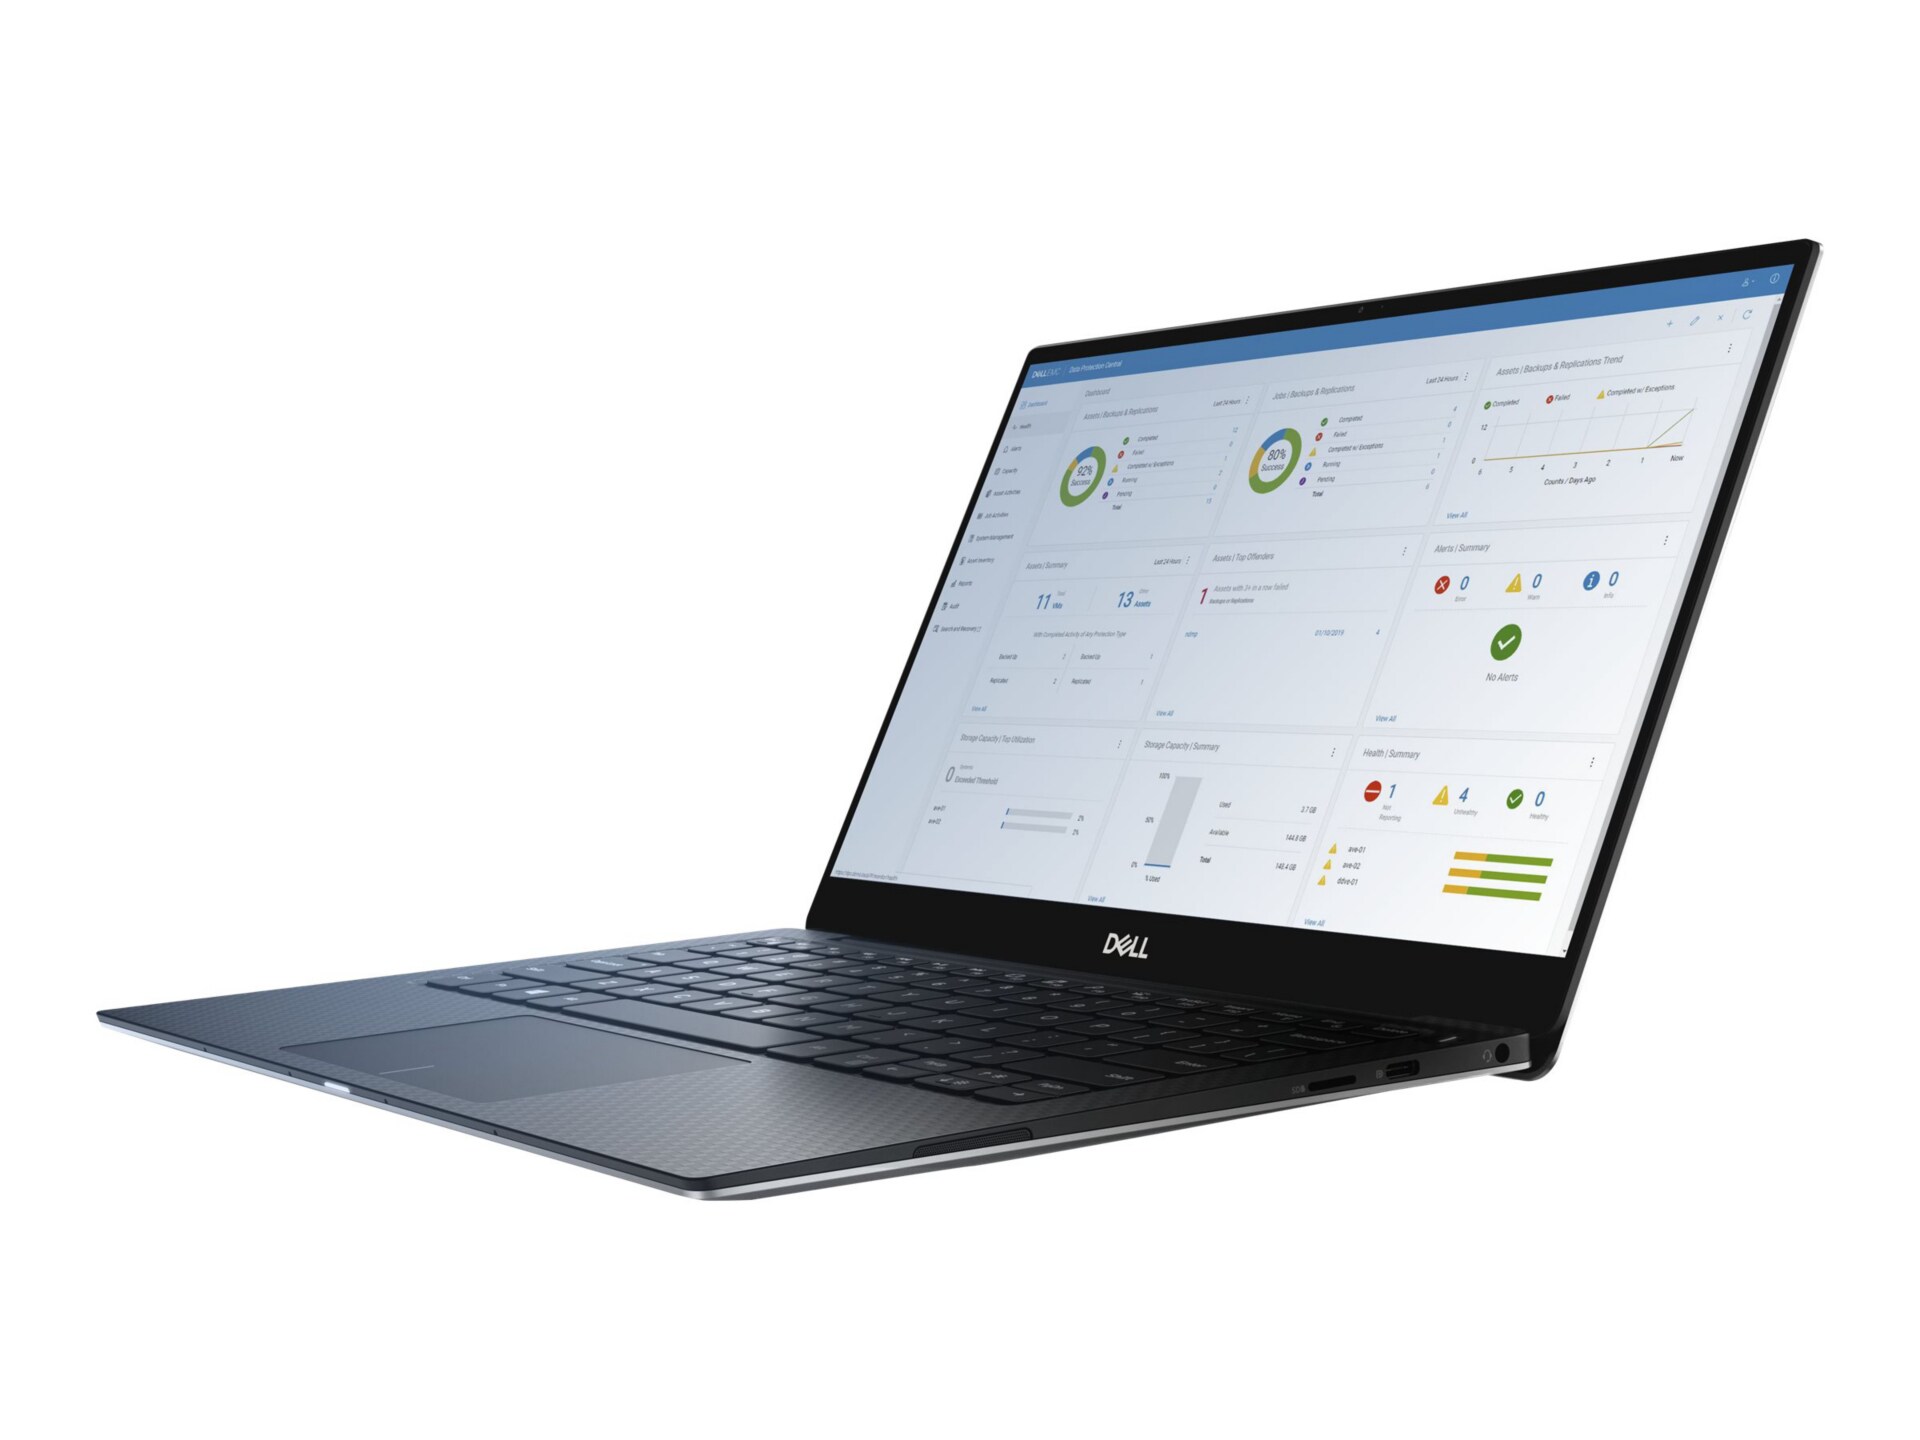 Dell XPS 13 9380 - 13.3" - Core i7 8565U - 16 GB RAM - 512 GB SSD - with 1-year ProSupport NBD